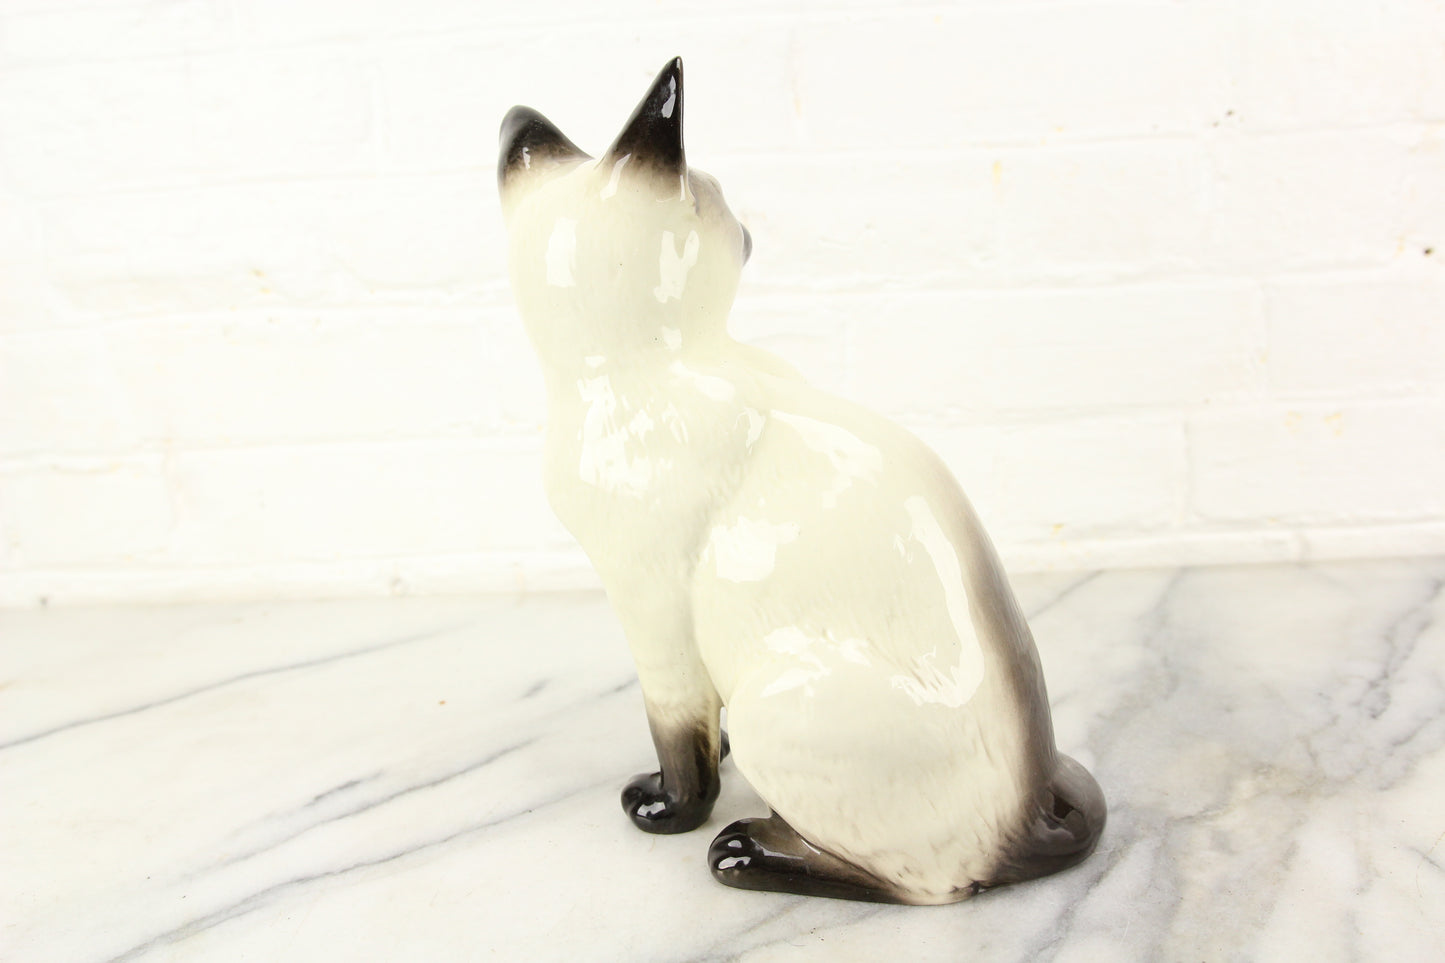 Beswick Porcelain Siamese Cat Statue 1882, Made in England, 9"